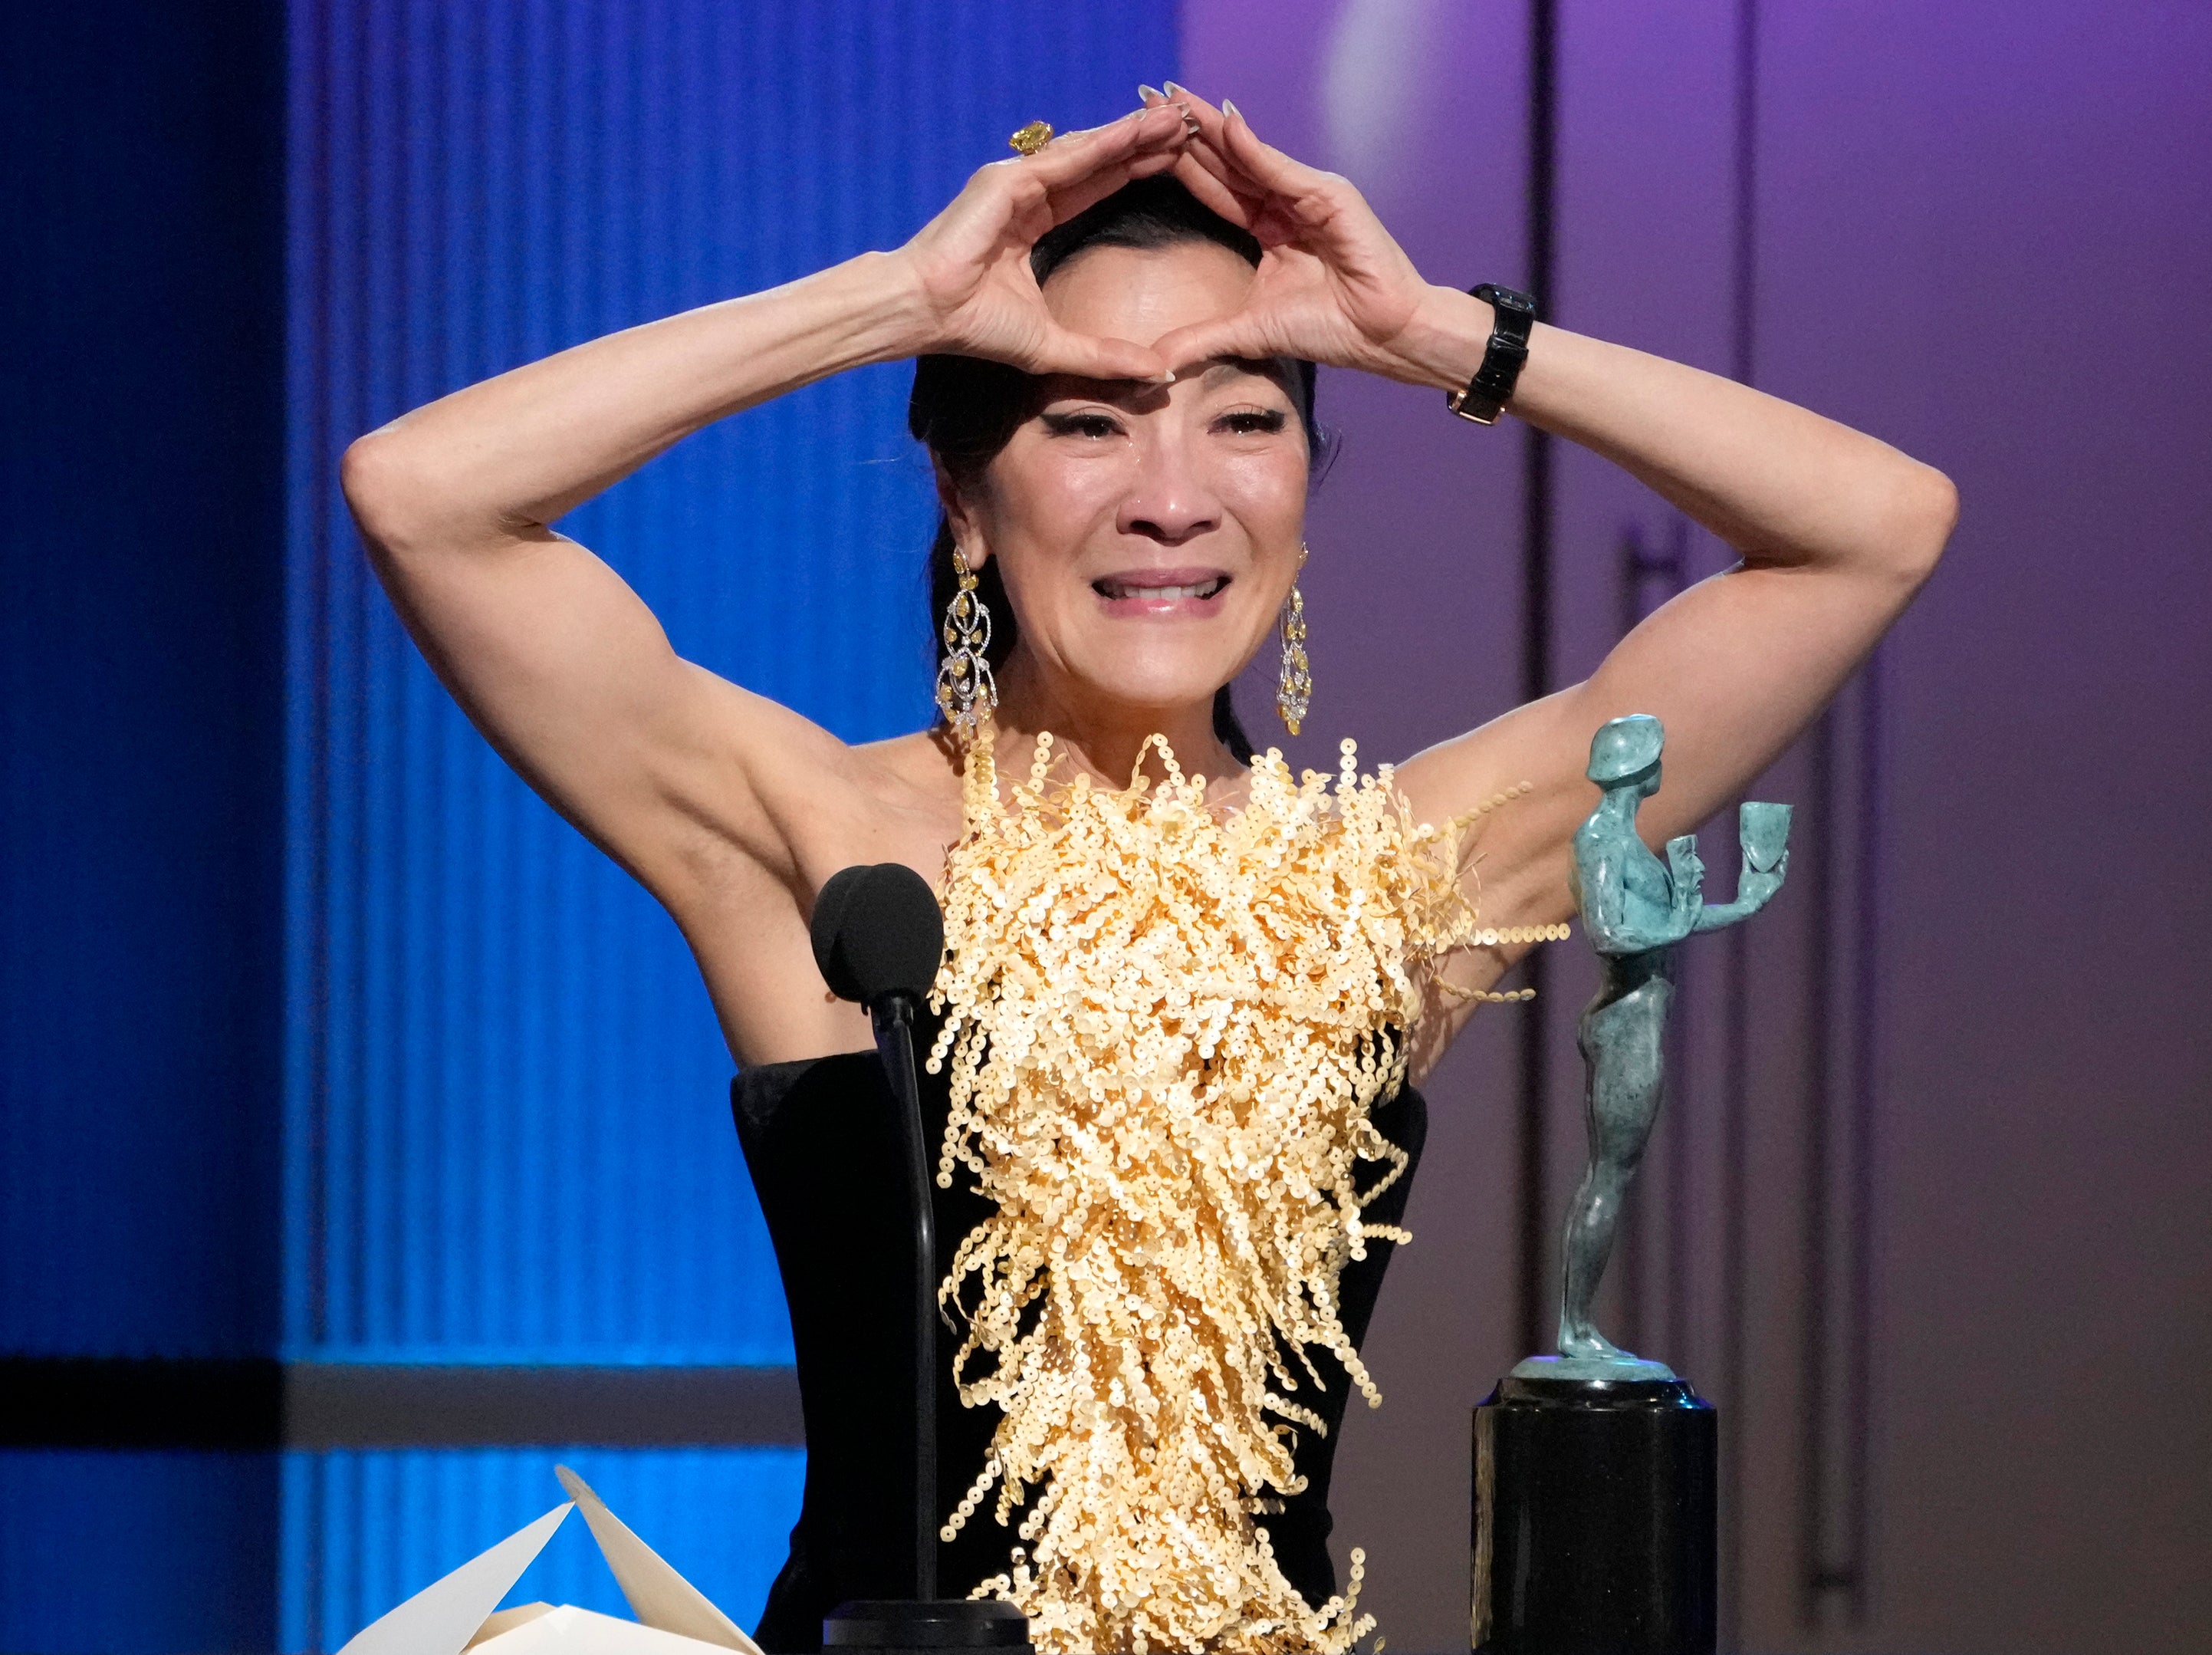 Michelle Yeoh makes an ‘EEAO’ reference while accepting the SAG award for Outstanding Performance by a Female Actor in a Leading Role